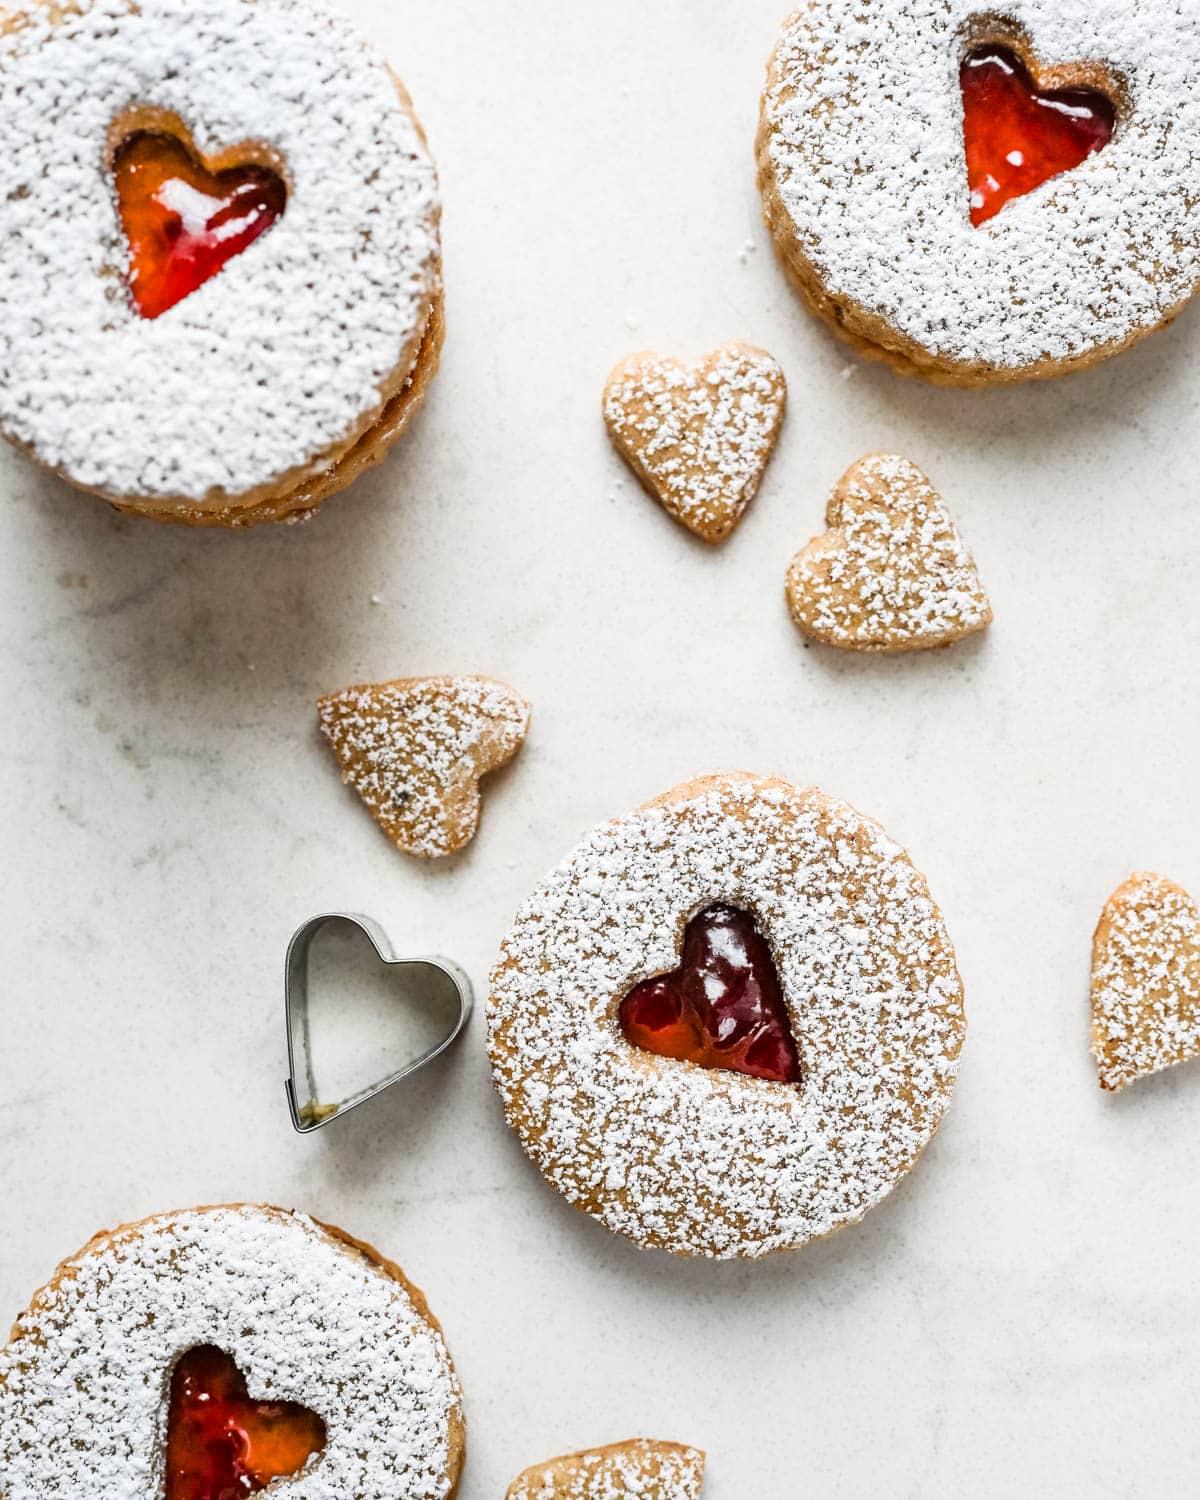 The decorated linzer cookies with powdered sugar.